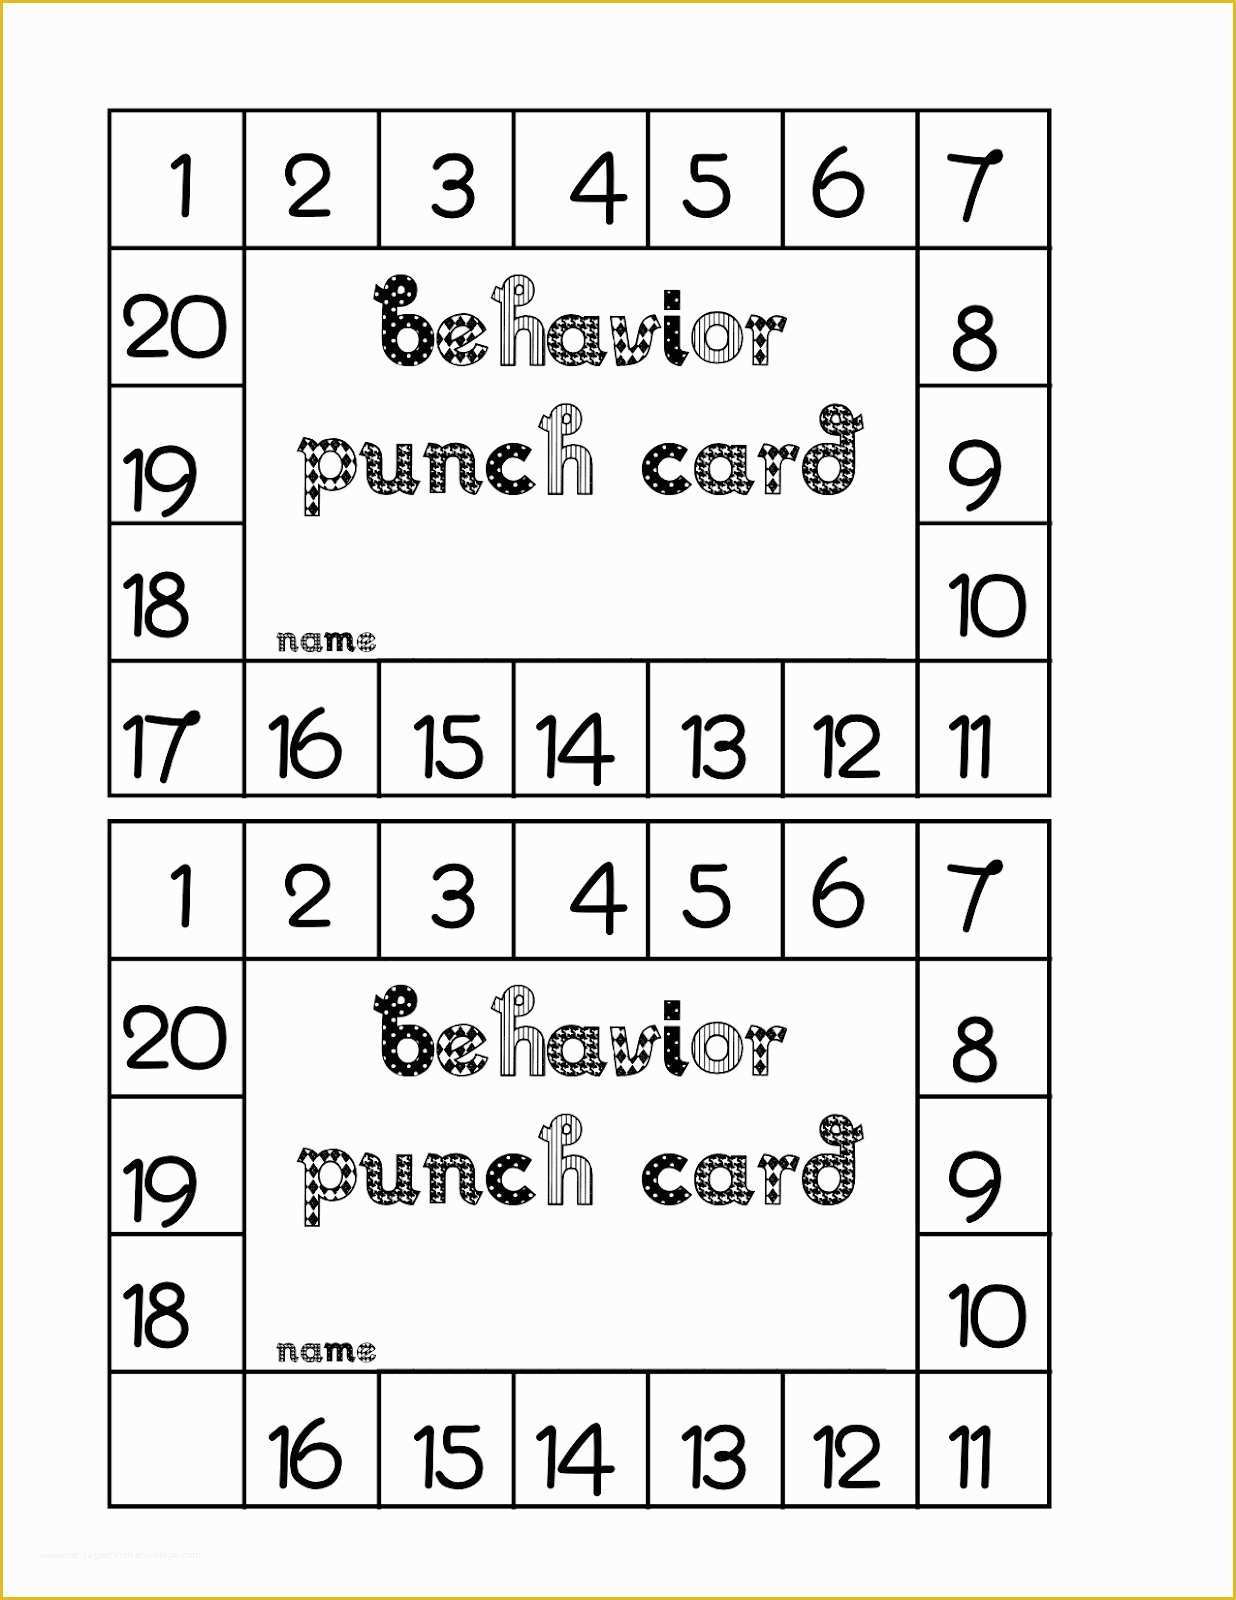 Free Punch Card Template Of Behavior Punch Card Classroom Freebies